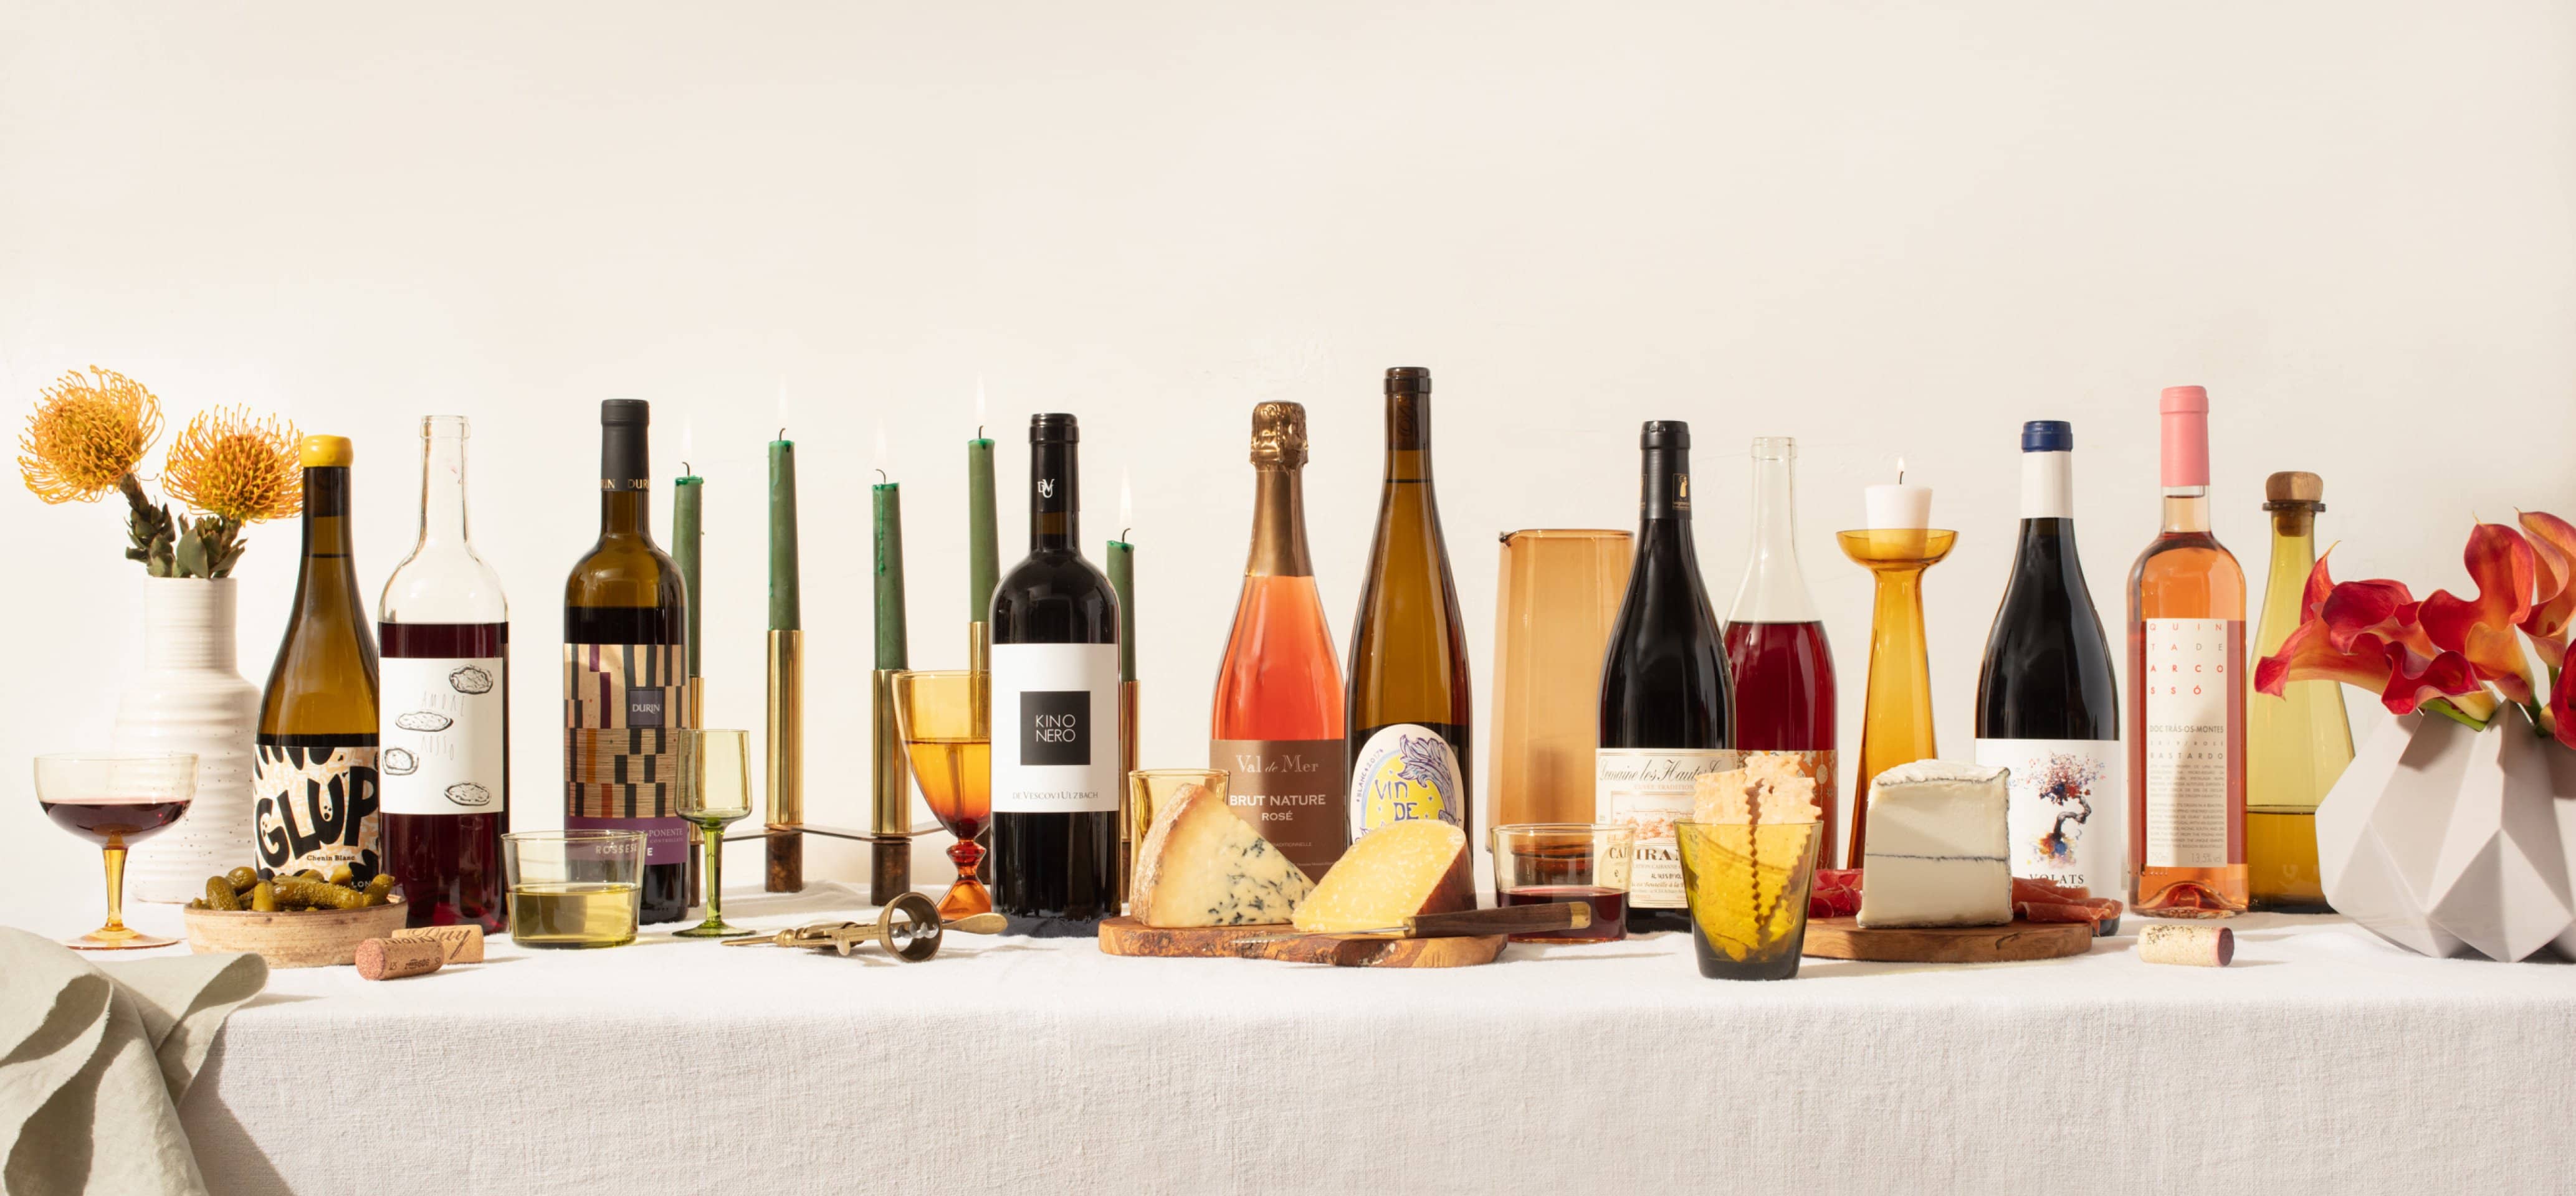 Try Plonk Monthly Wine club closetsamples